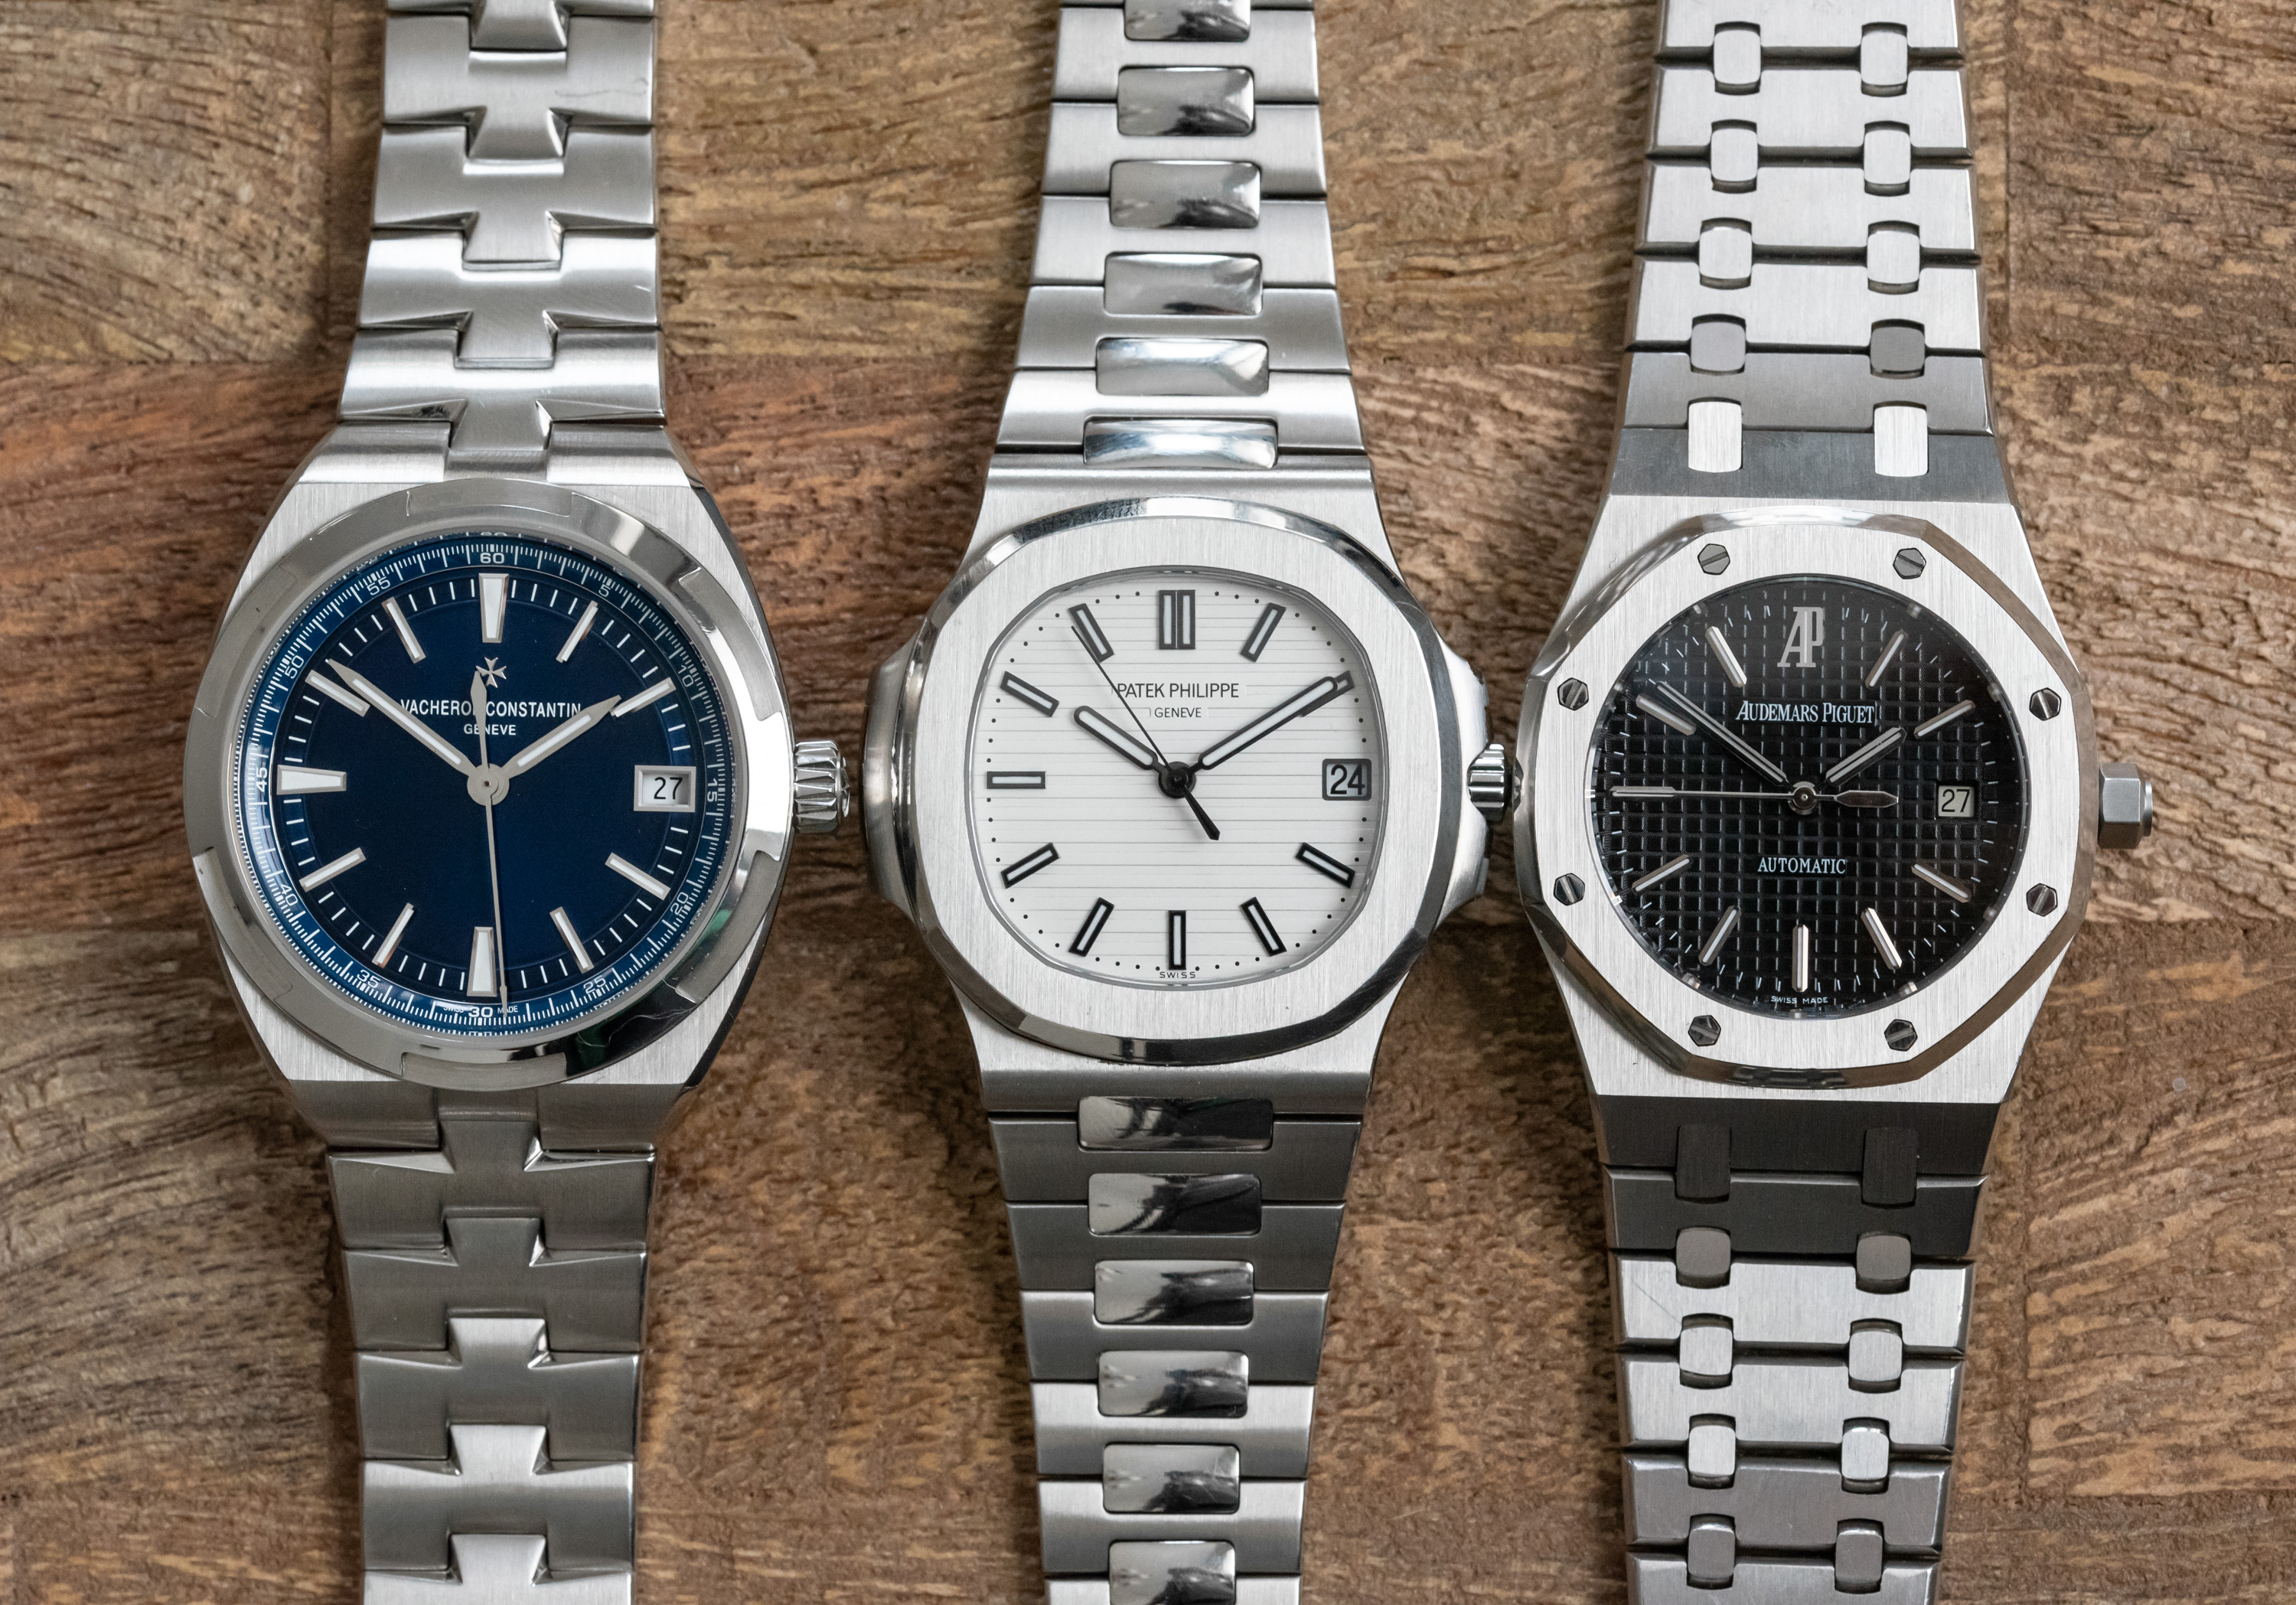 The Holy Trinity with Genuine Dials | Replica Watch Info